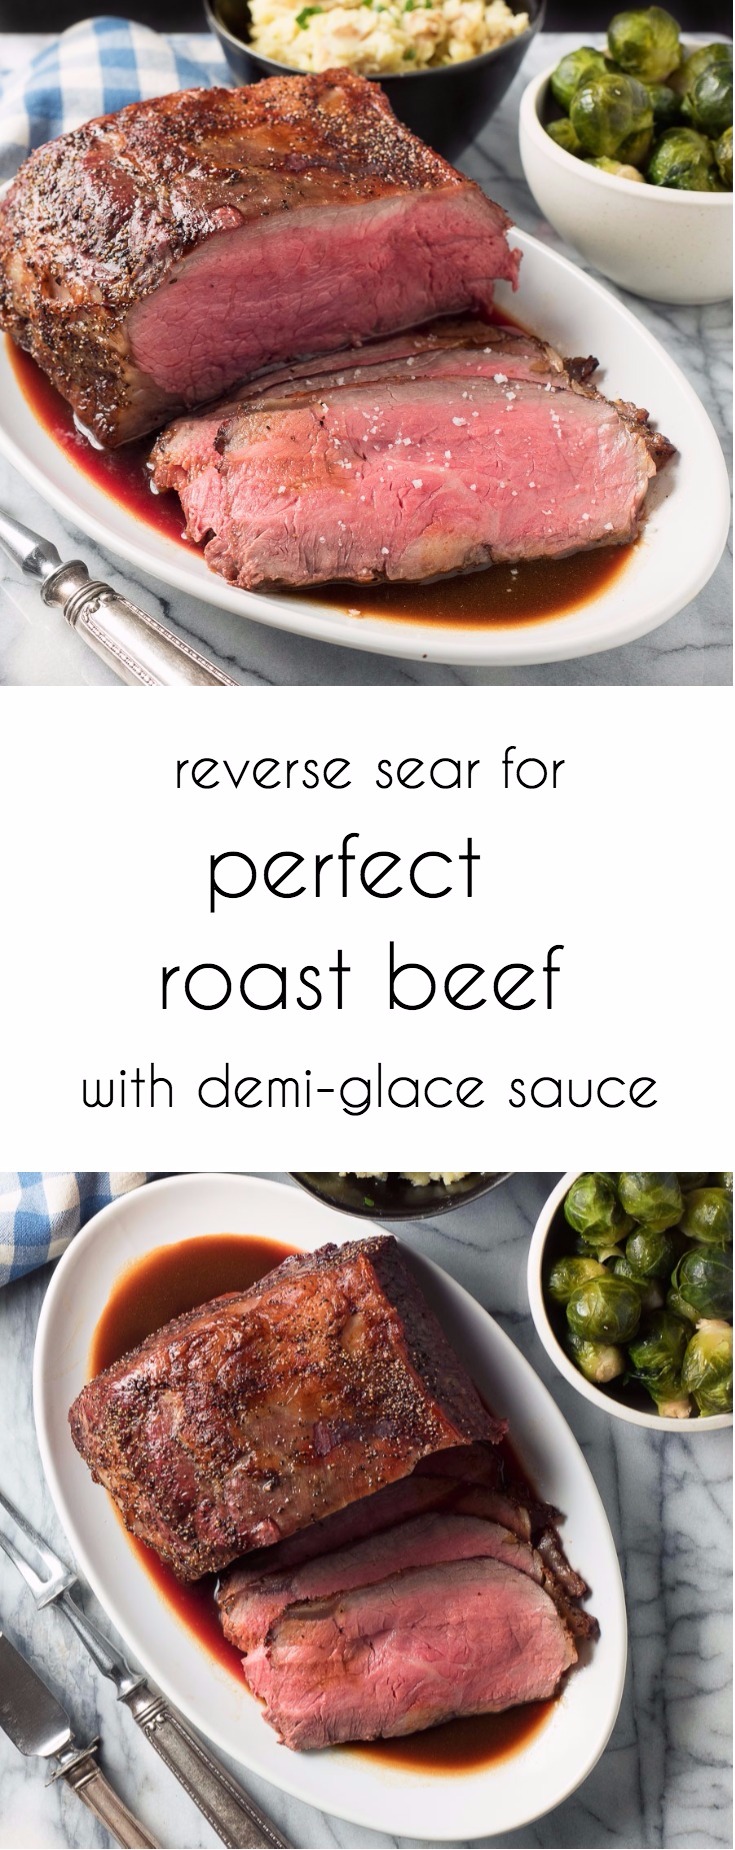 Perfect roast beef with demi-glace sauce is the high end, reverse sear restaurant version of the classic Sunday roast dinner.